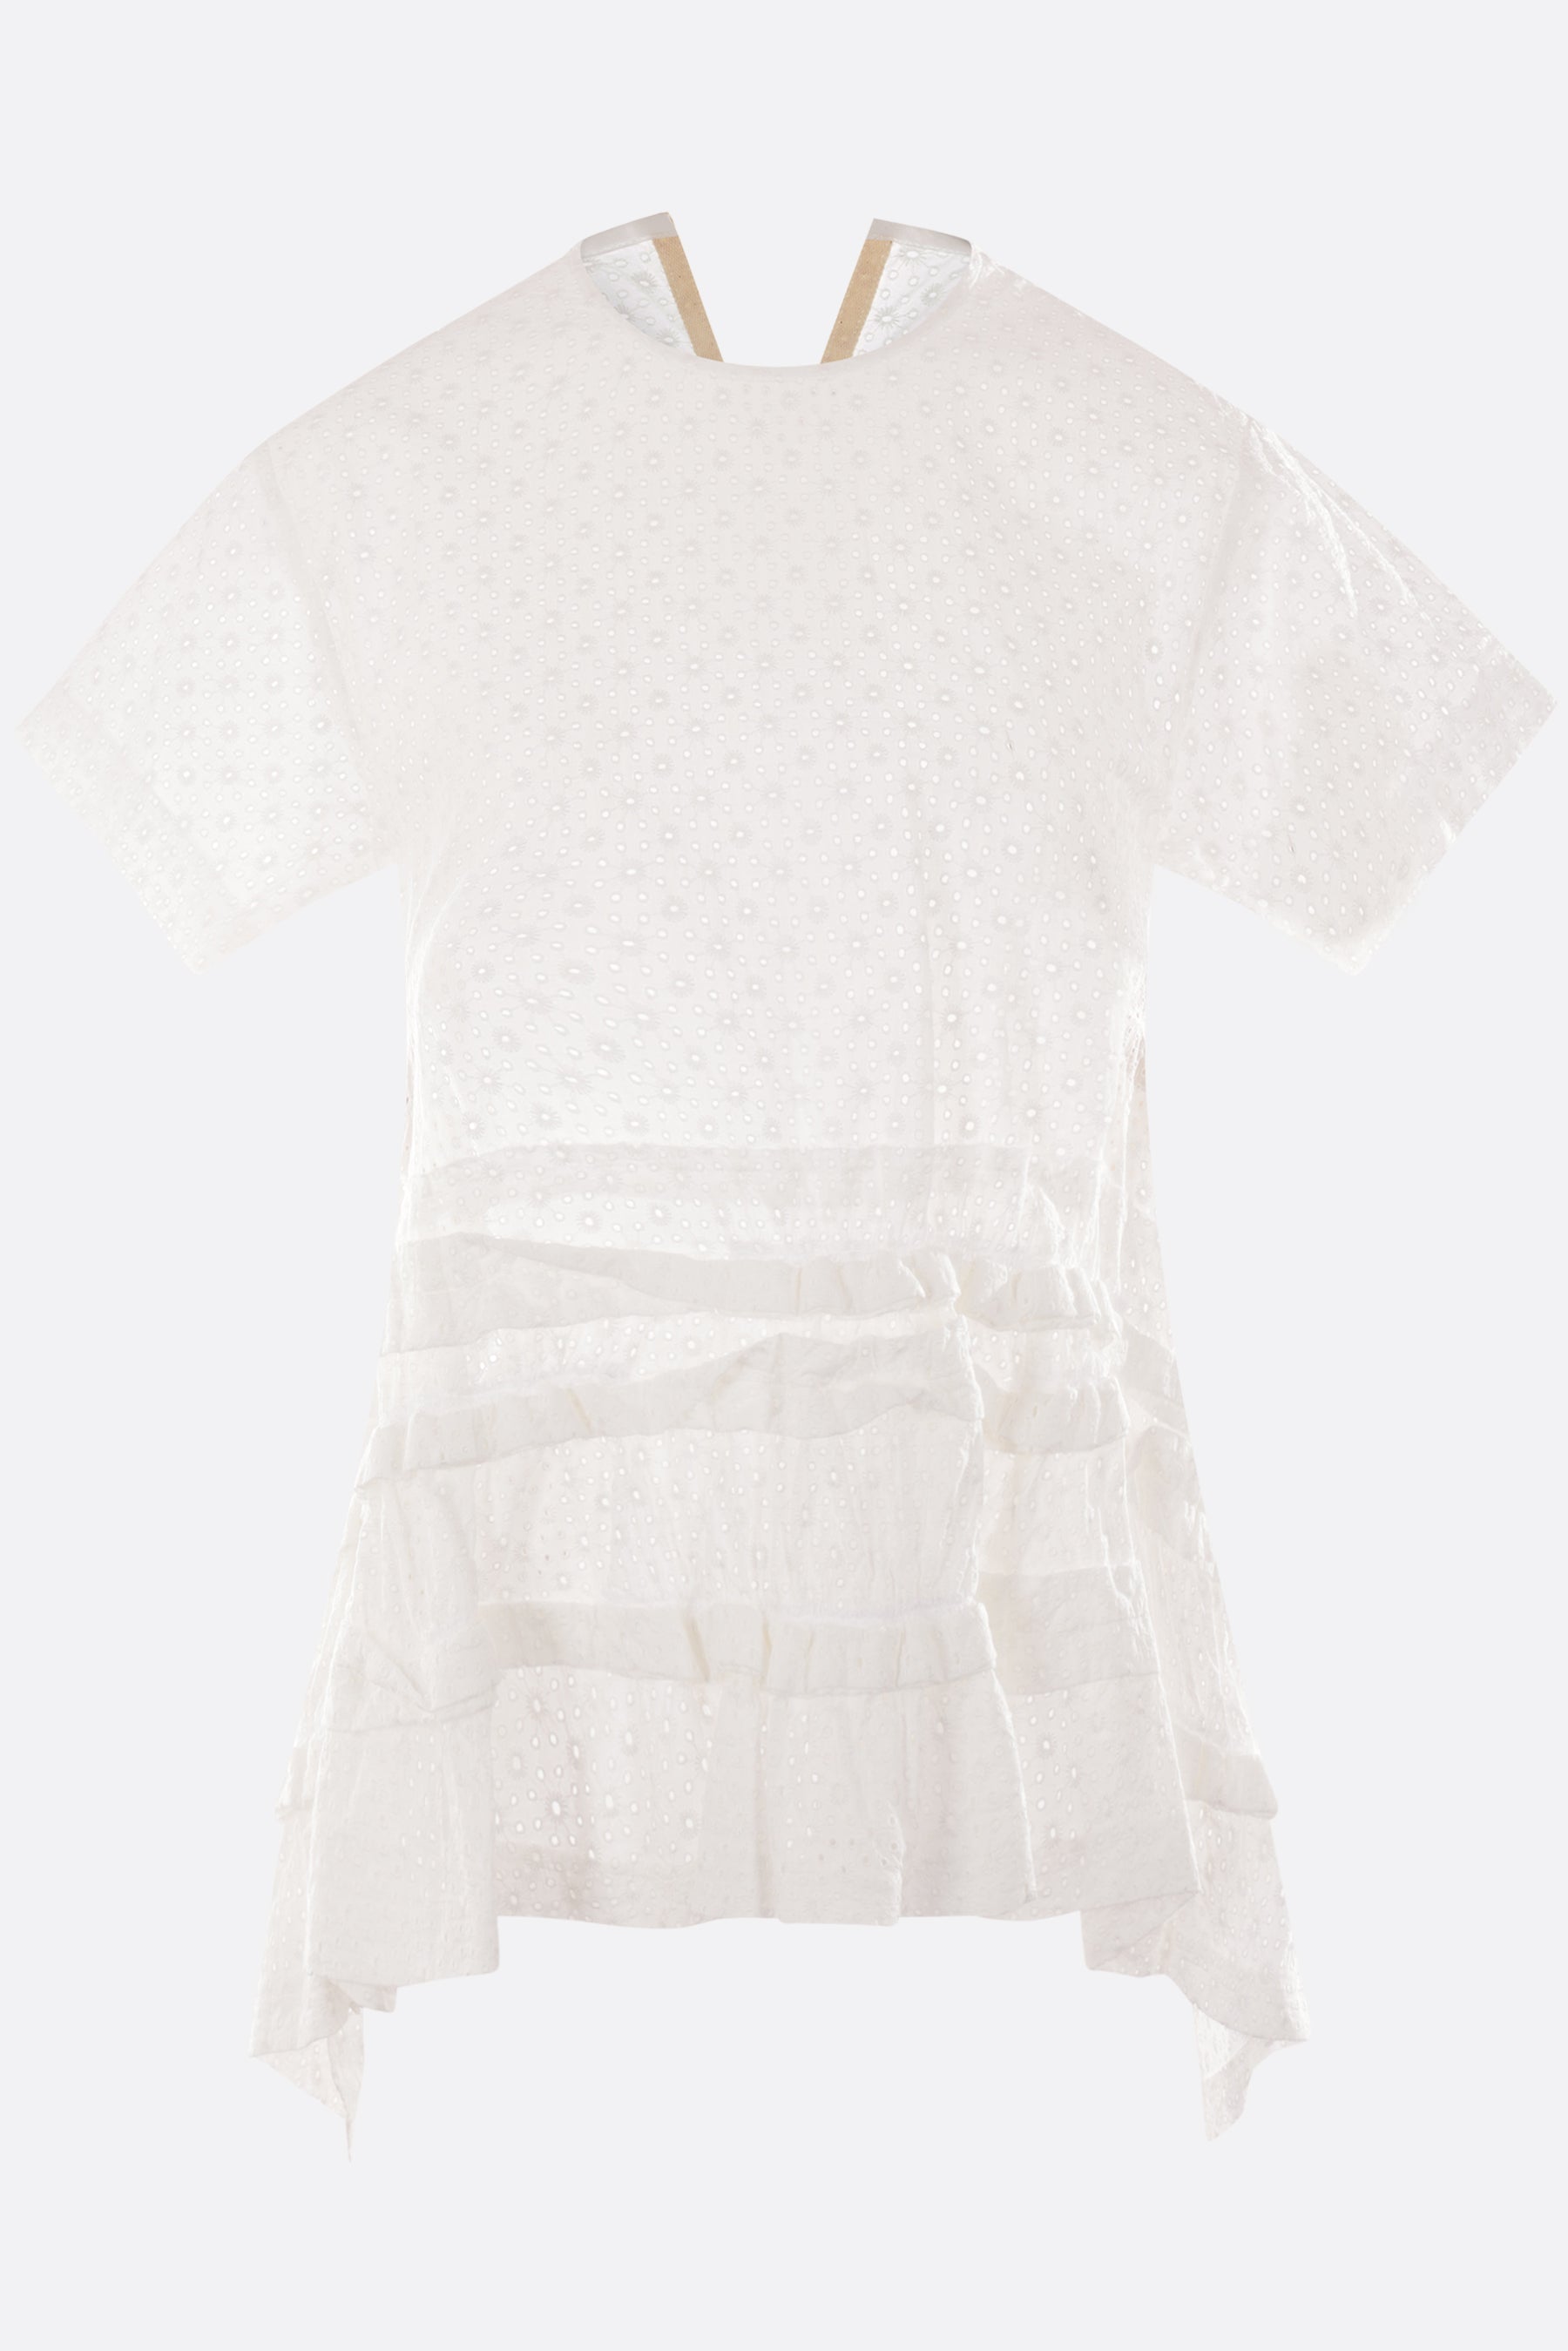 broderie anglaise cotton destructured top